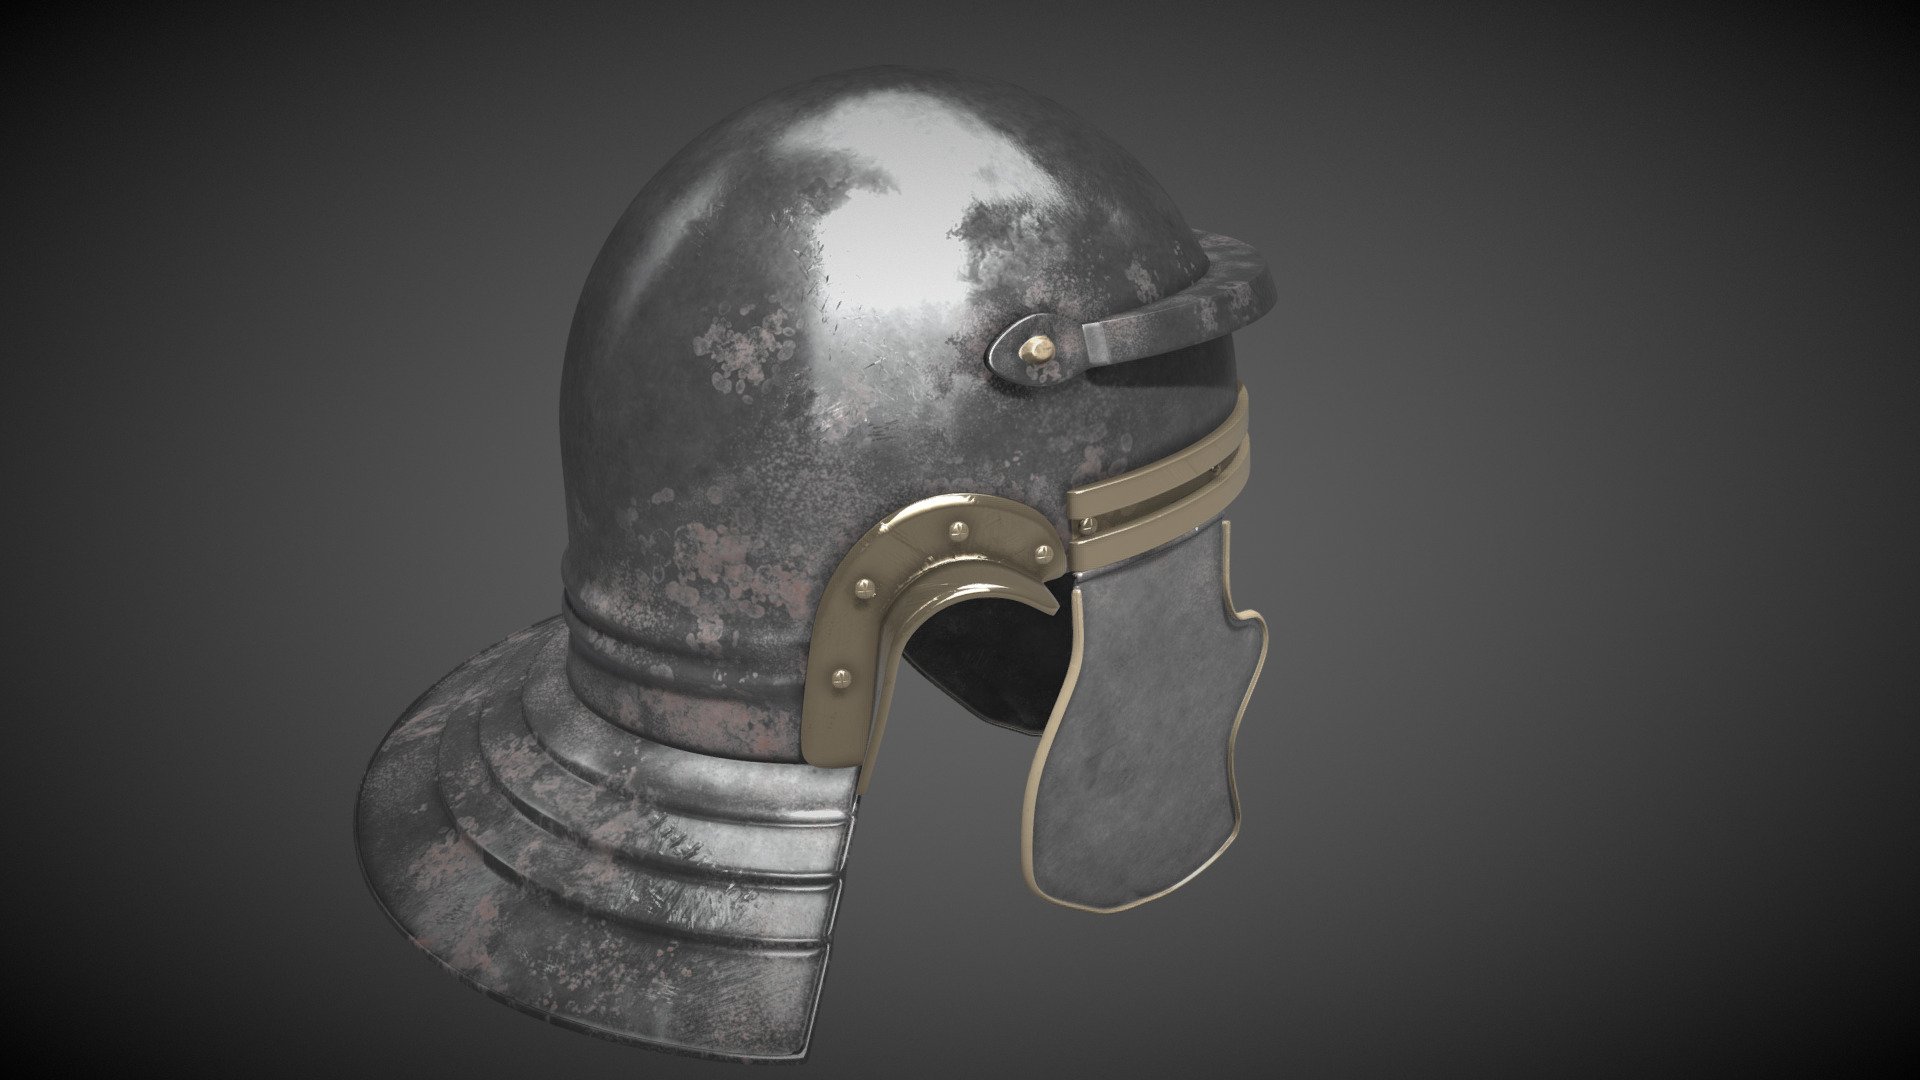 Roman Italic helmet from 1st to 3rd century
Quad High Poly Mesh PBR textures Modelled in Blender 2.79 and textured in Substance Painter Also available .obj format in .zip file including textures - Casco Itálico/ Roman Italic Helmet - Buy Royalty Free 3D model by La Sibila (@LaSibilaS.L.) 3d model